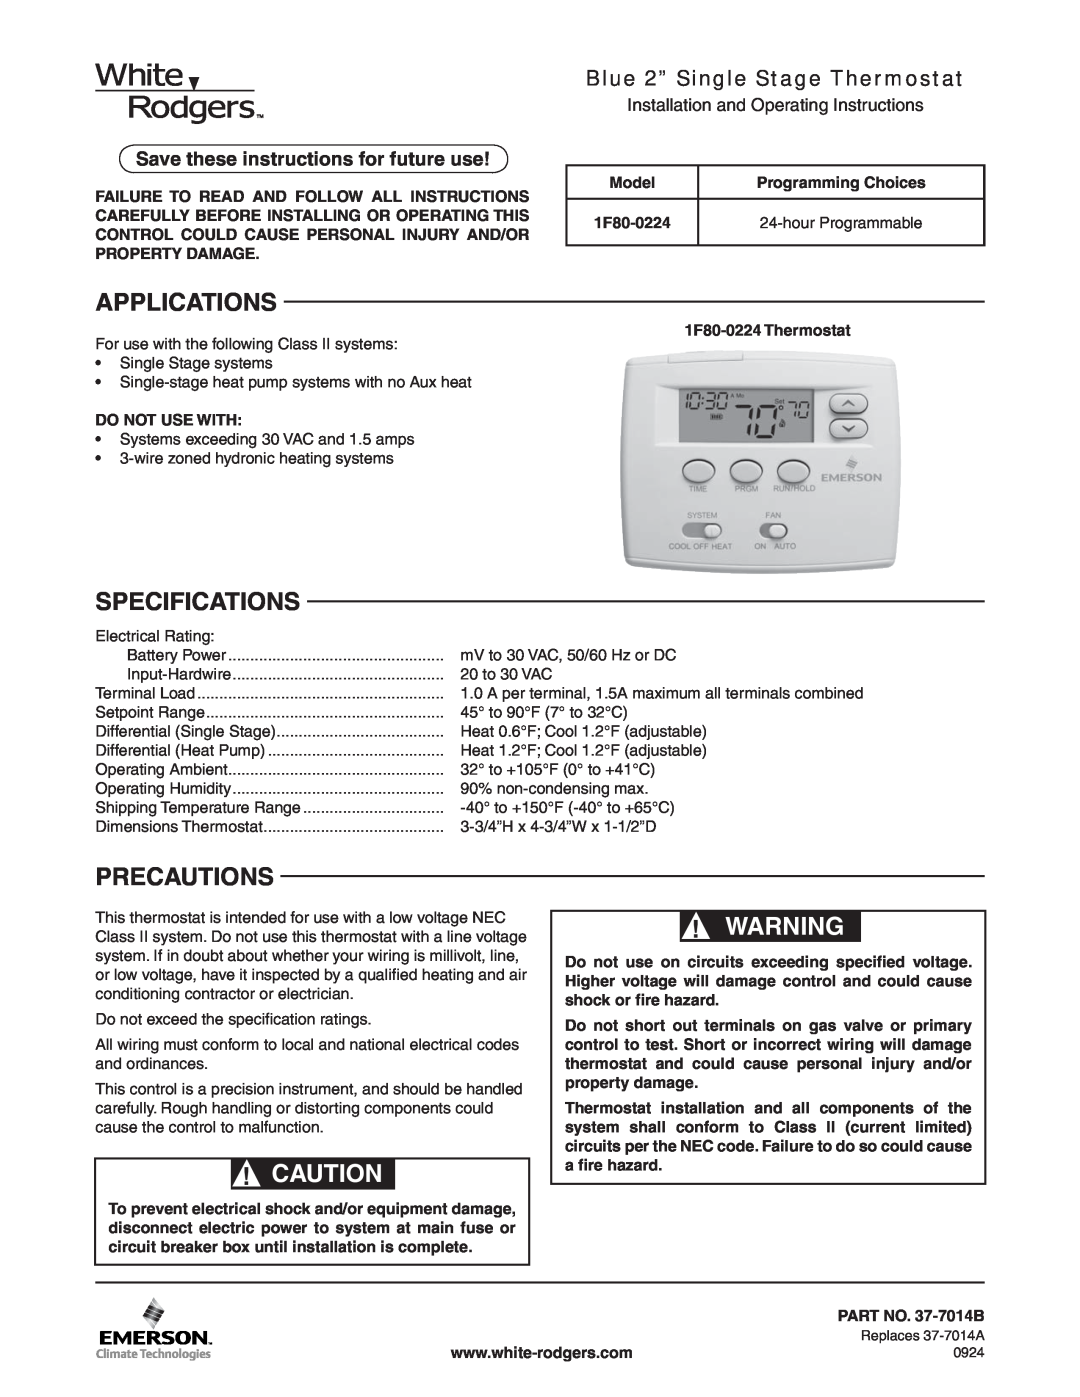 White Rodgers 1F80-0224 specifications Applications, Specifications, Precautions, Blue 2” Single Stage Thermostat 